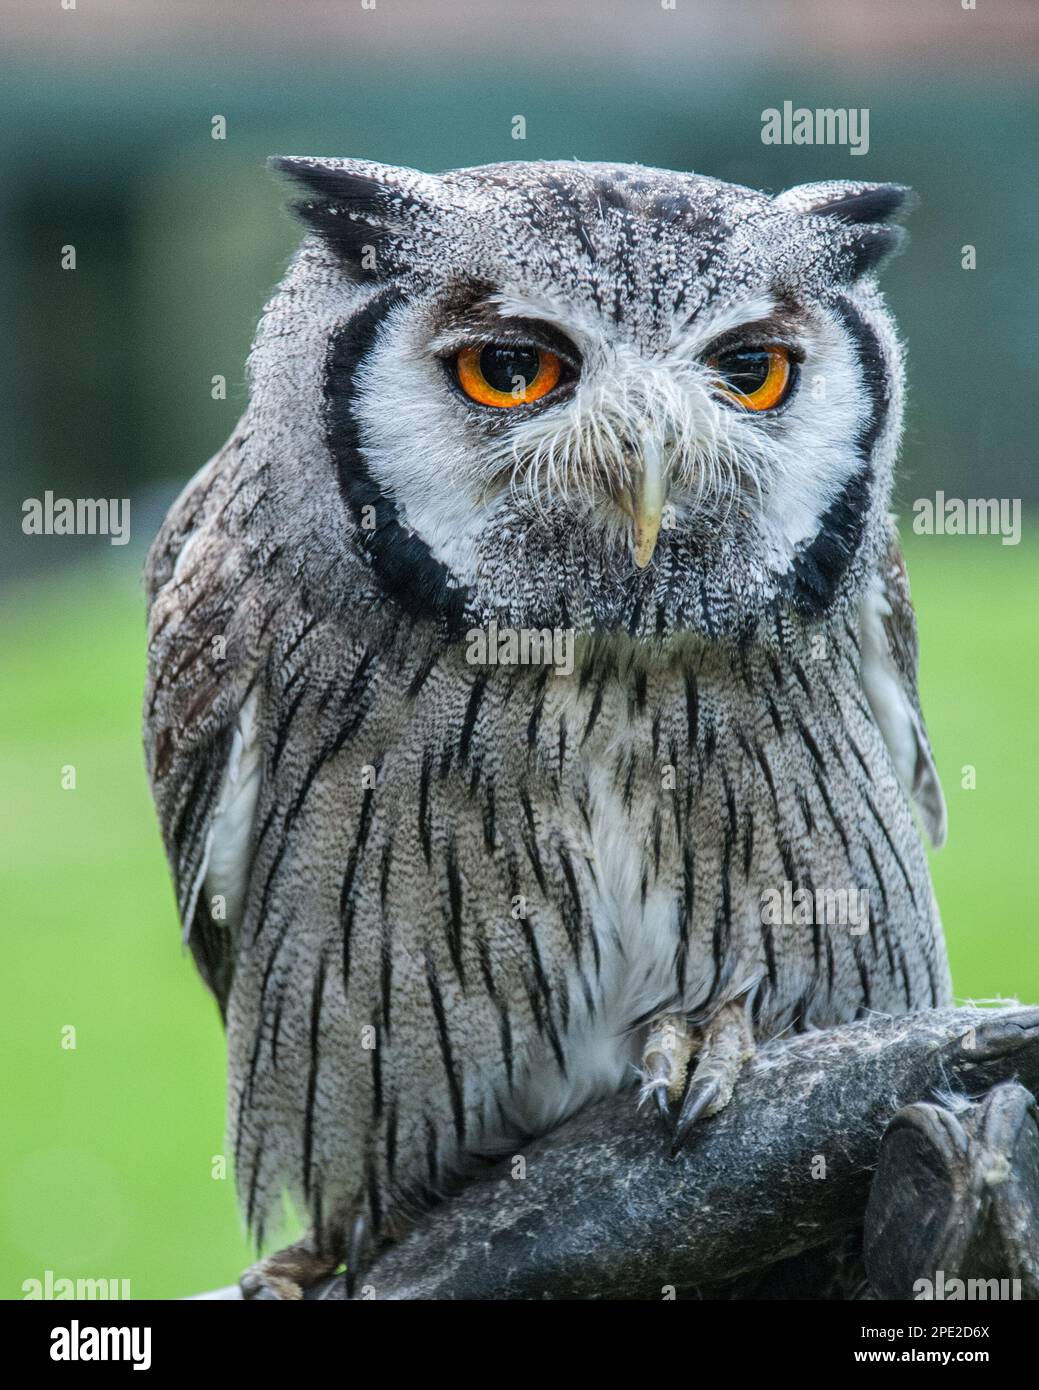 The northern white-faced owl (Ptilopsis leucotis) is a small but striking owl with a white face and yellow-orange eyes, surrounded by black feathers. Stock Photo